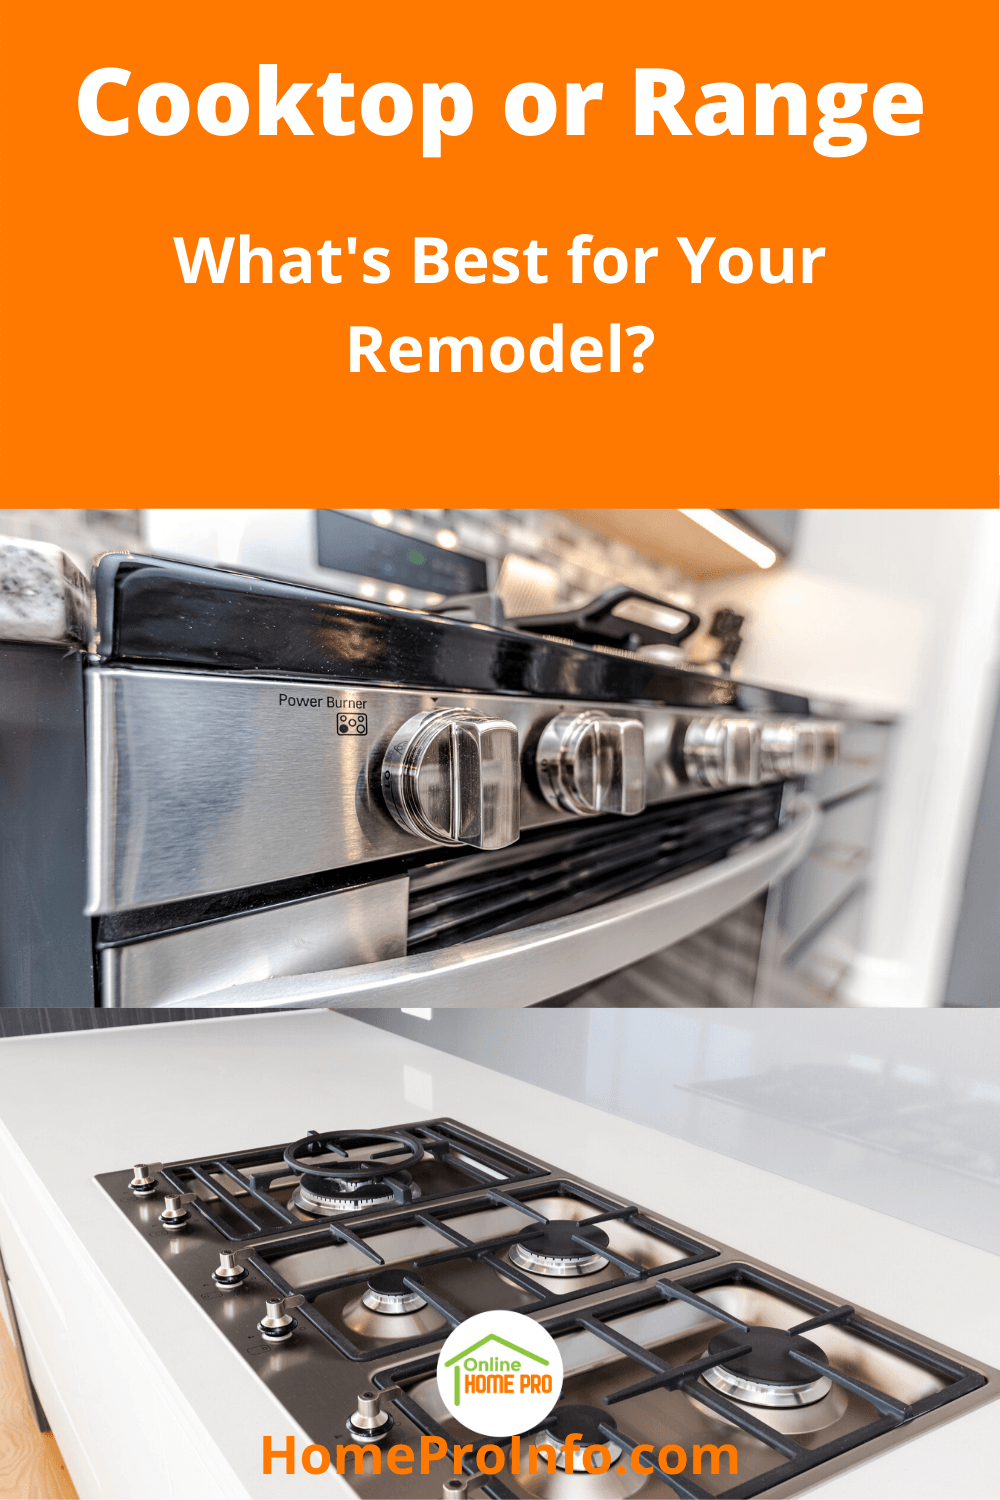 cooktop or range for a remodel